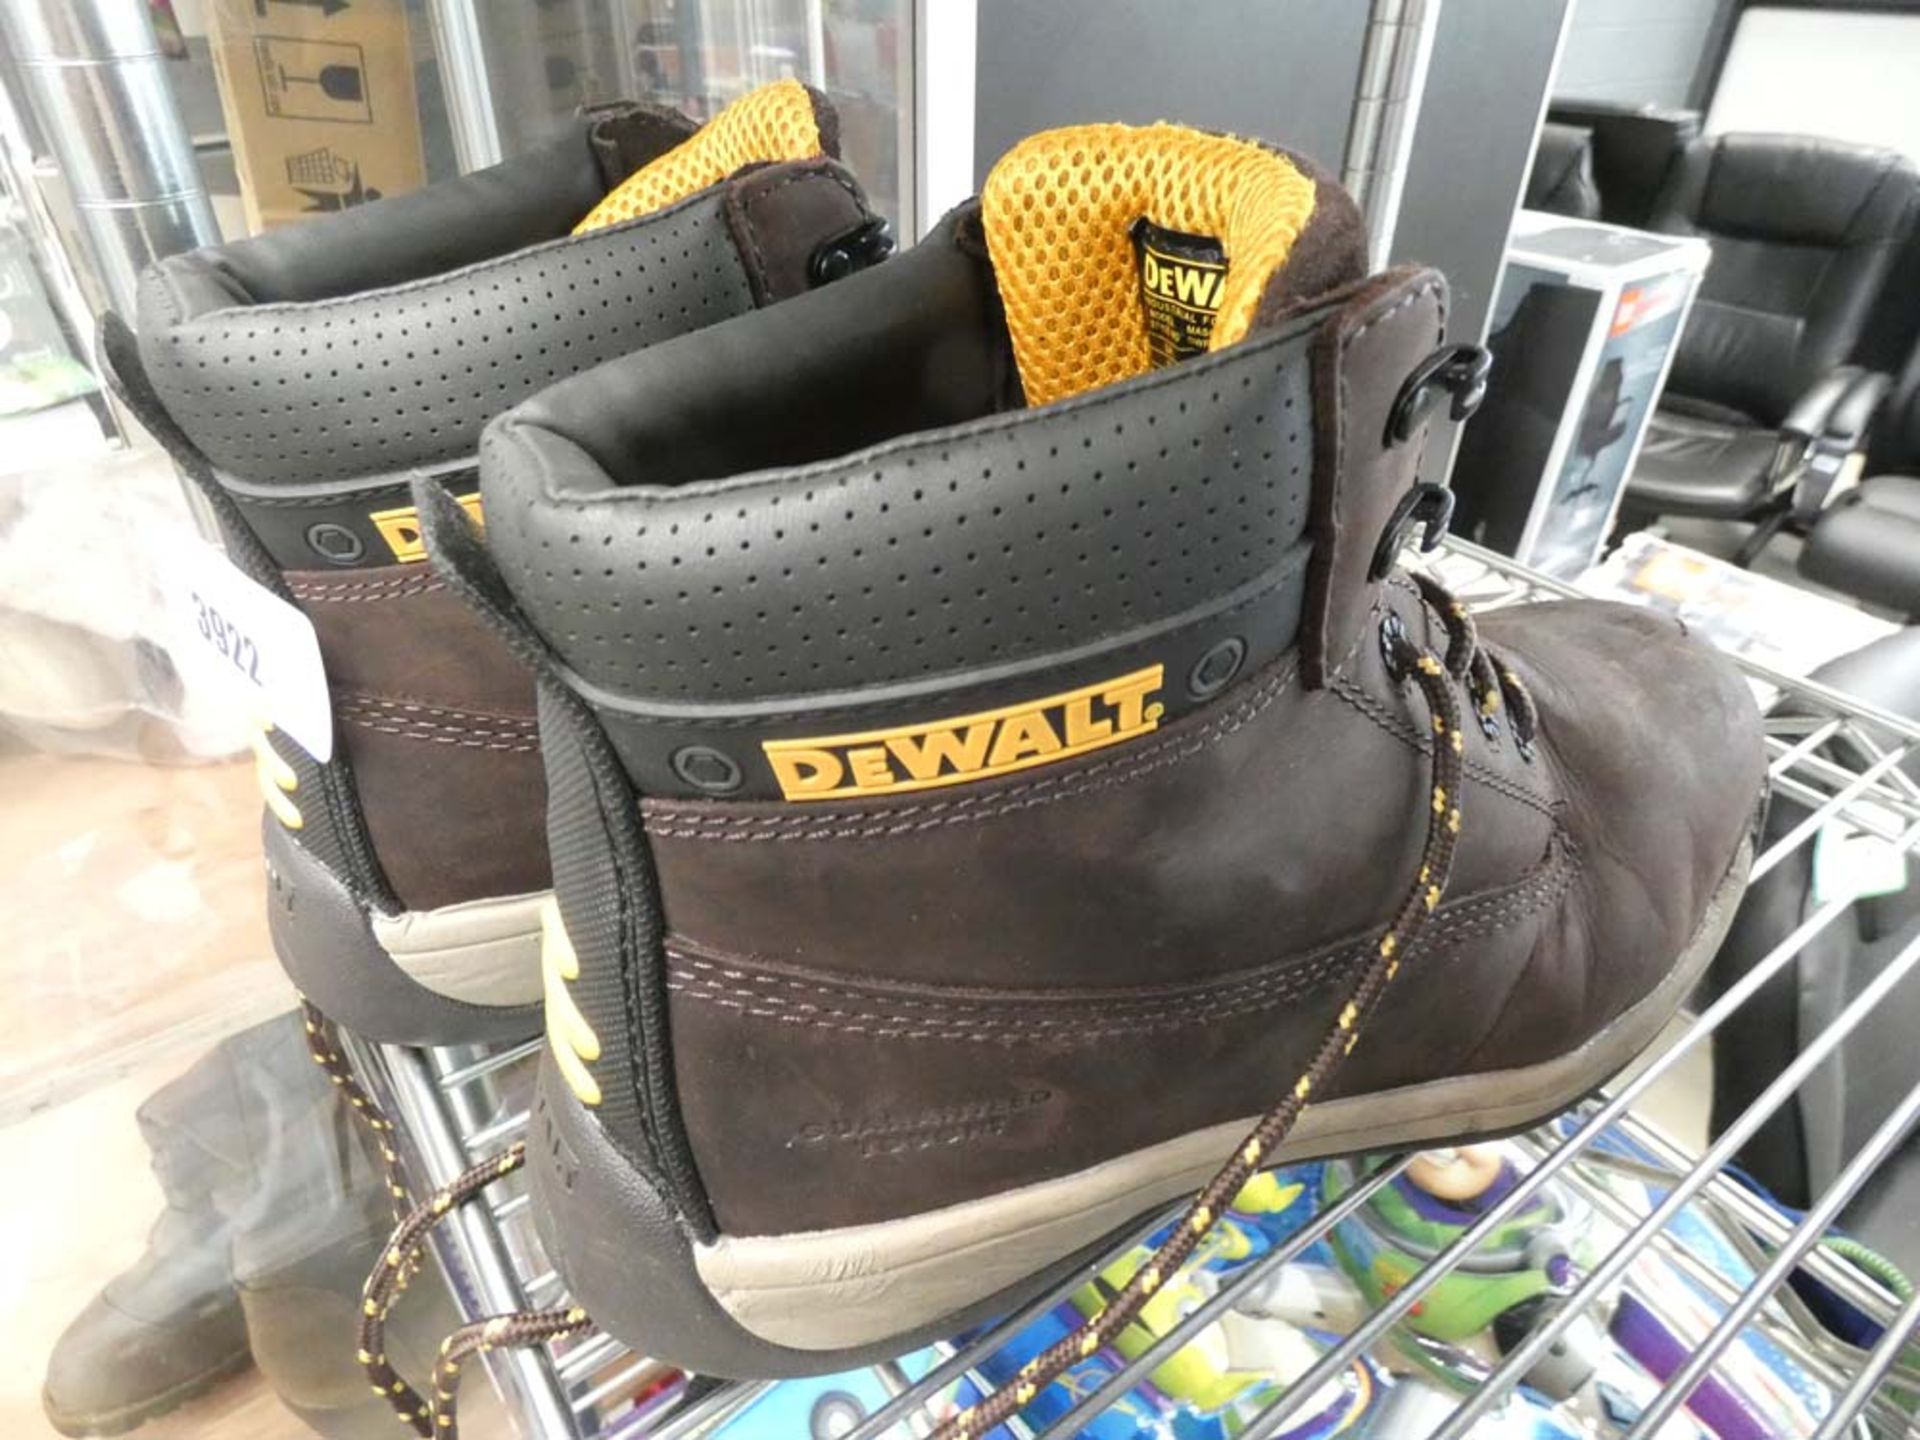 Boxed pair of Skecher shoes and pair of Dewalt boots